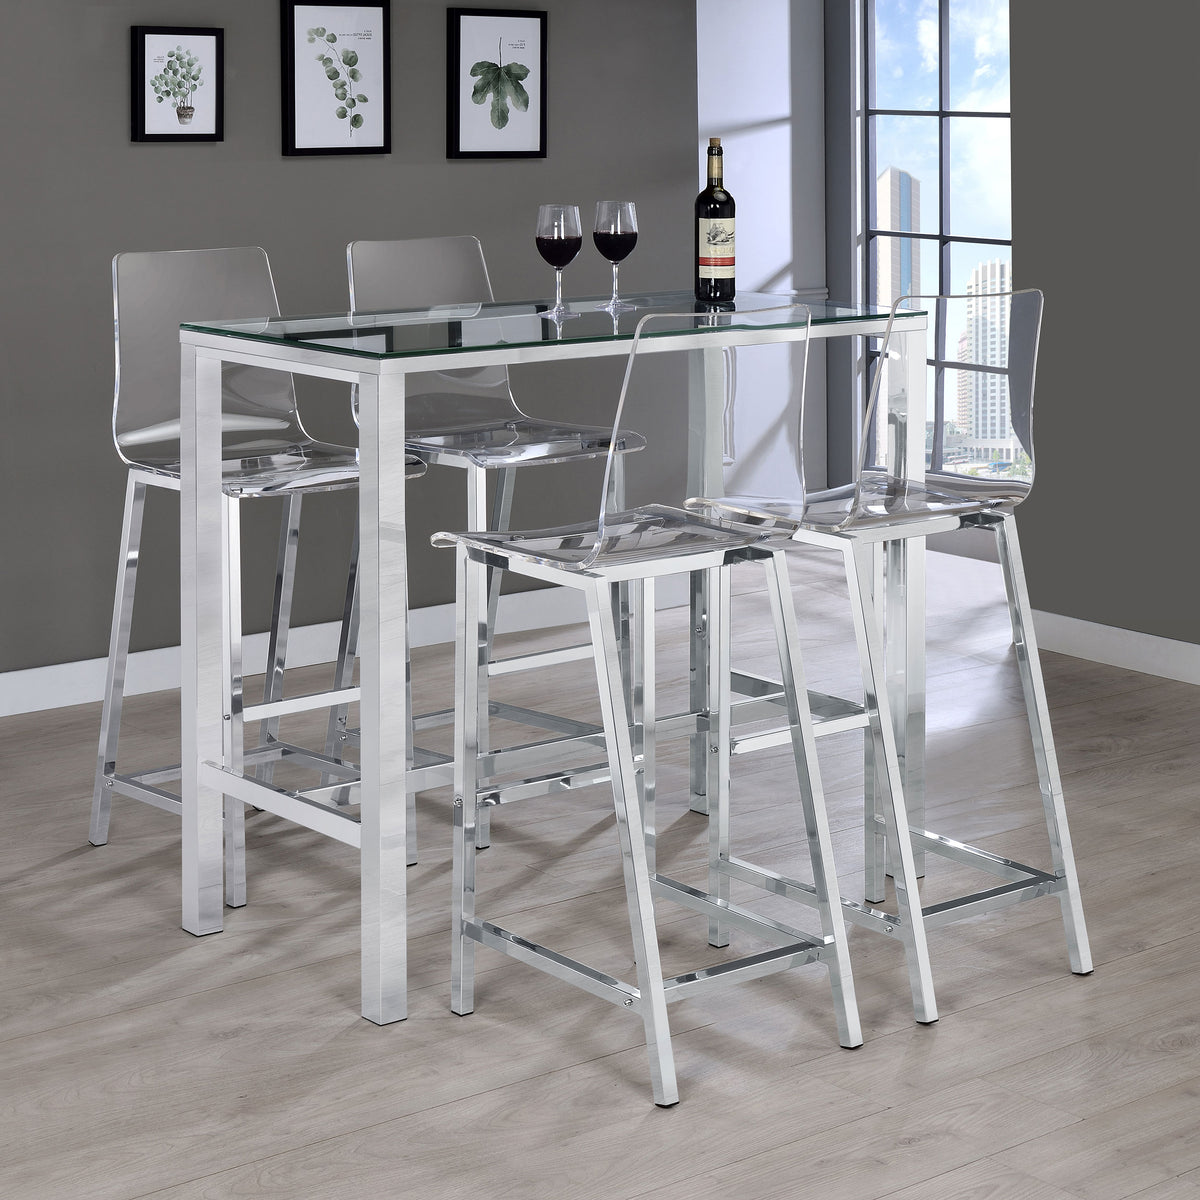 Tolbert 5-piece Bar Set with Acrylic Chairs Clear and Chrome Tolbert 5-piece Bar Set with Acrylic Chairs Clear and Chrome Half Price Furniture